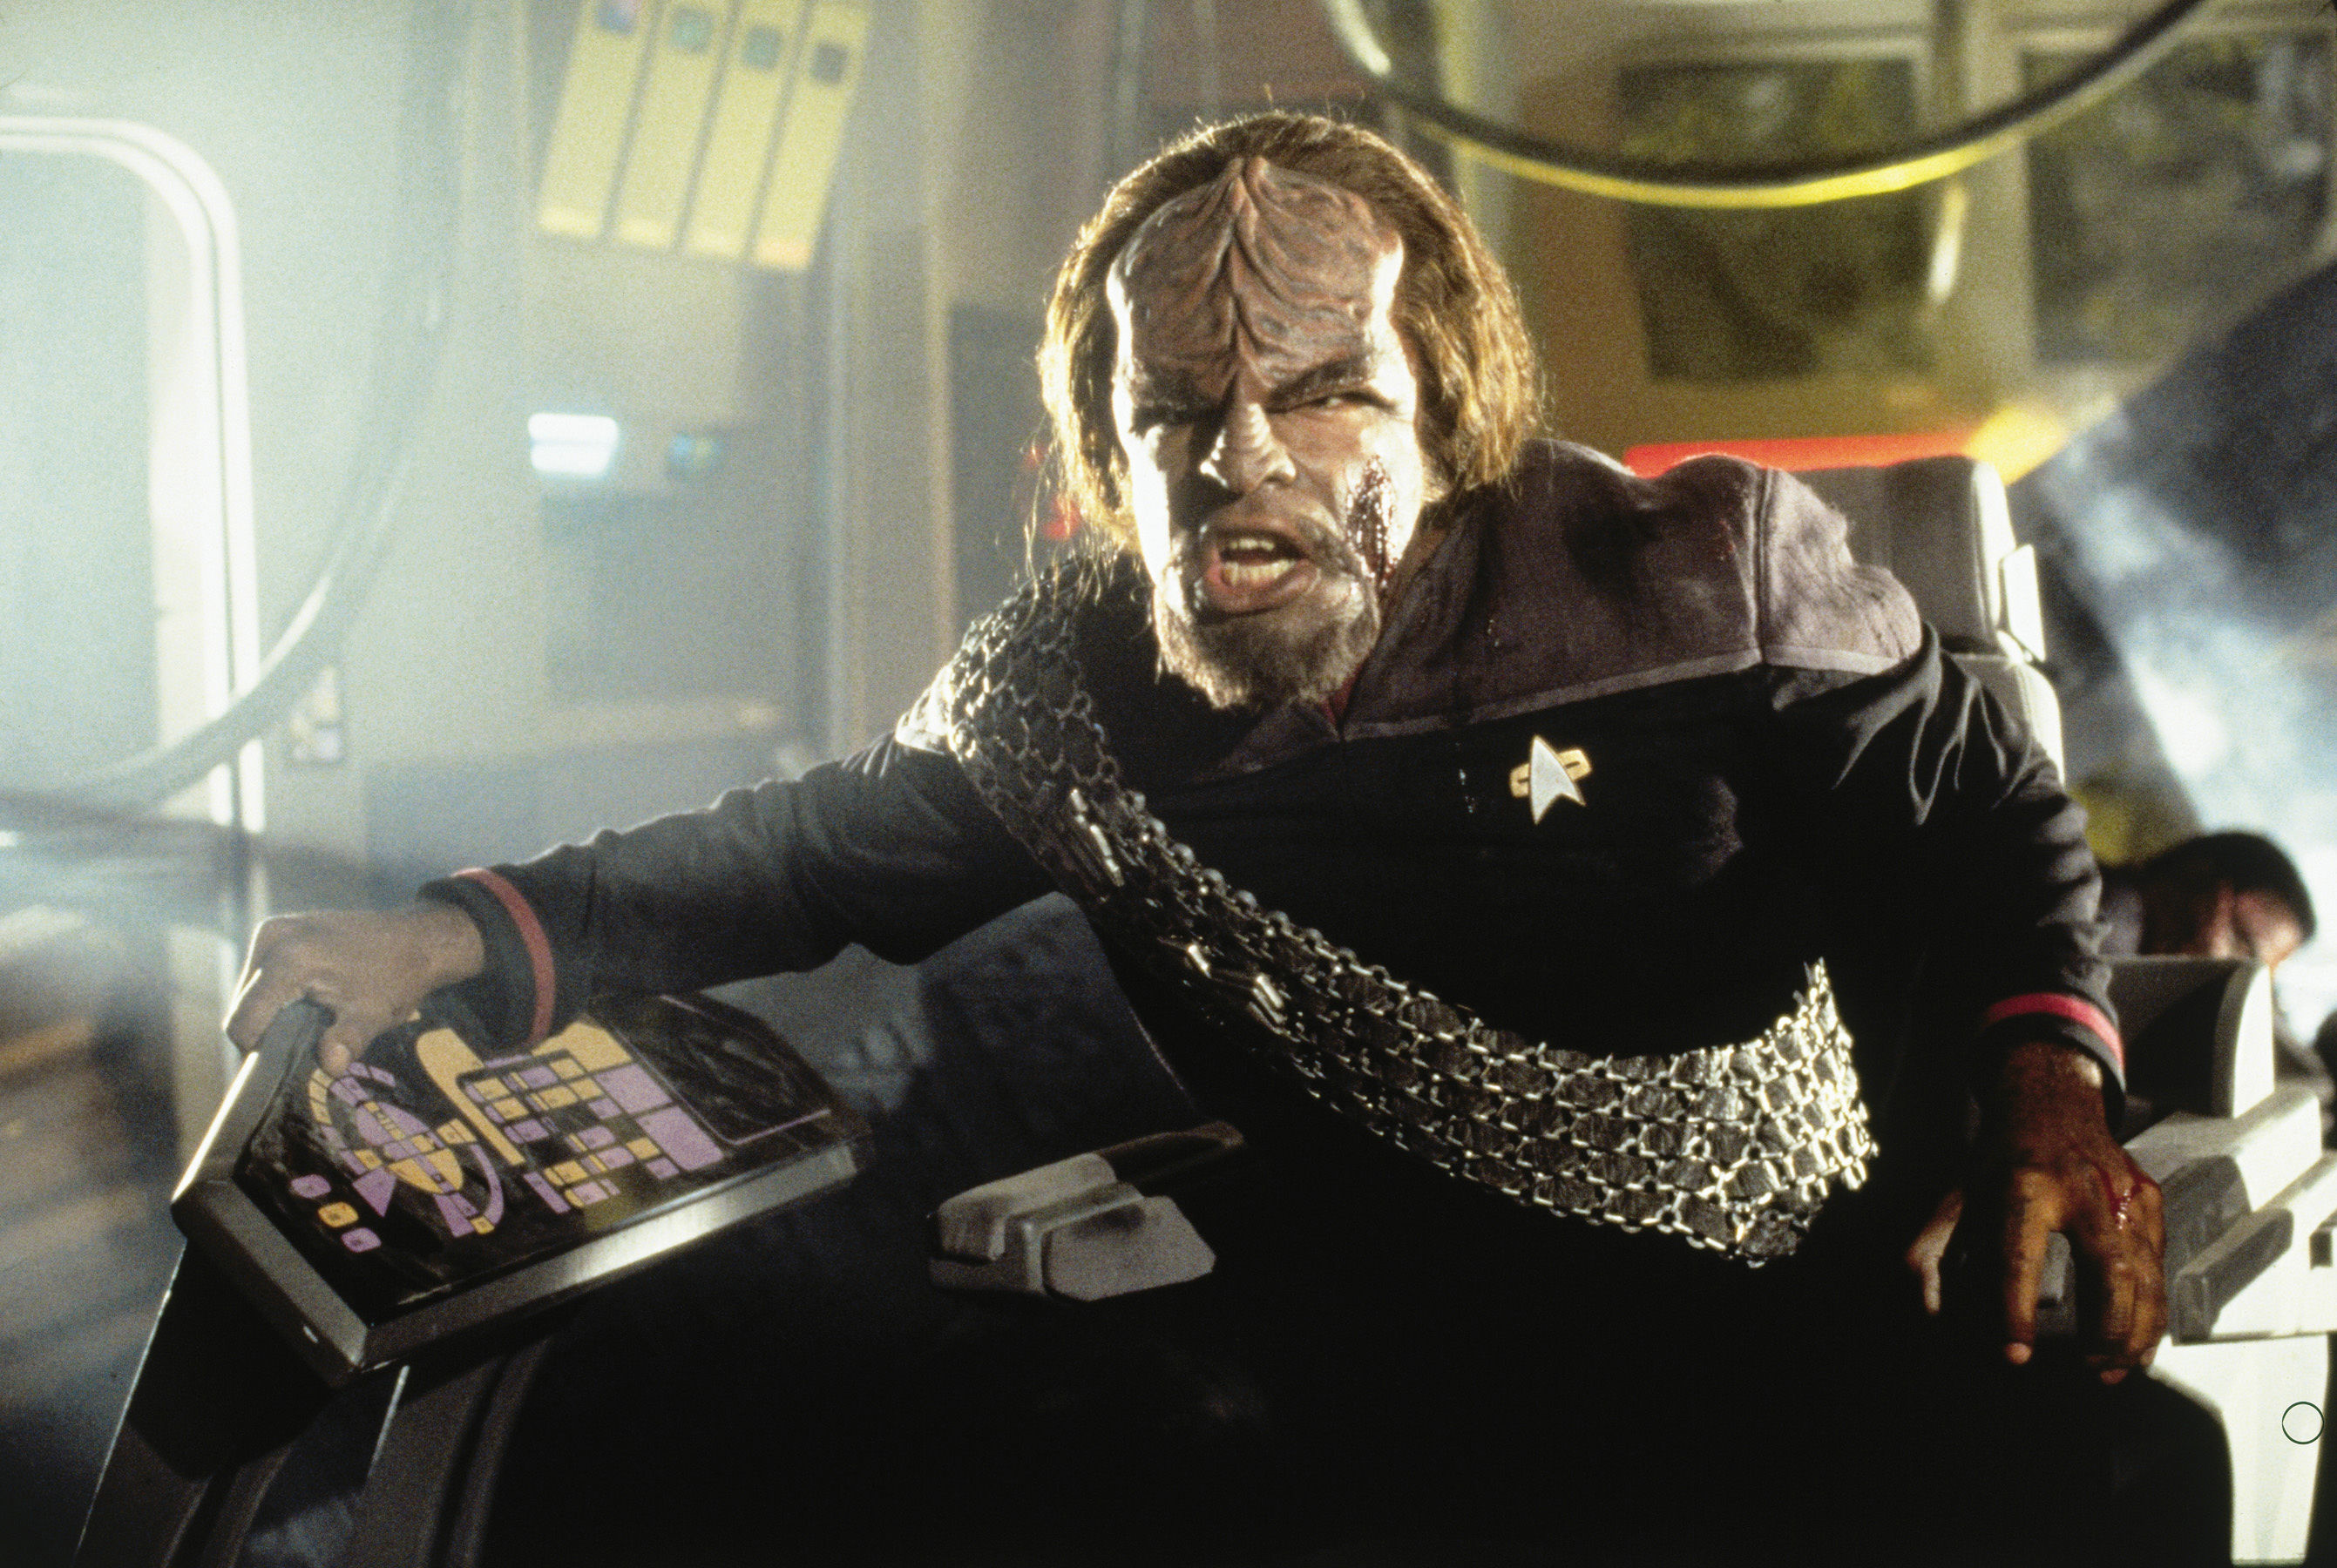 Klingon star trek hd papers and backgrounds